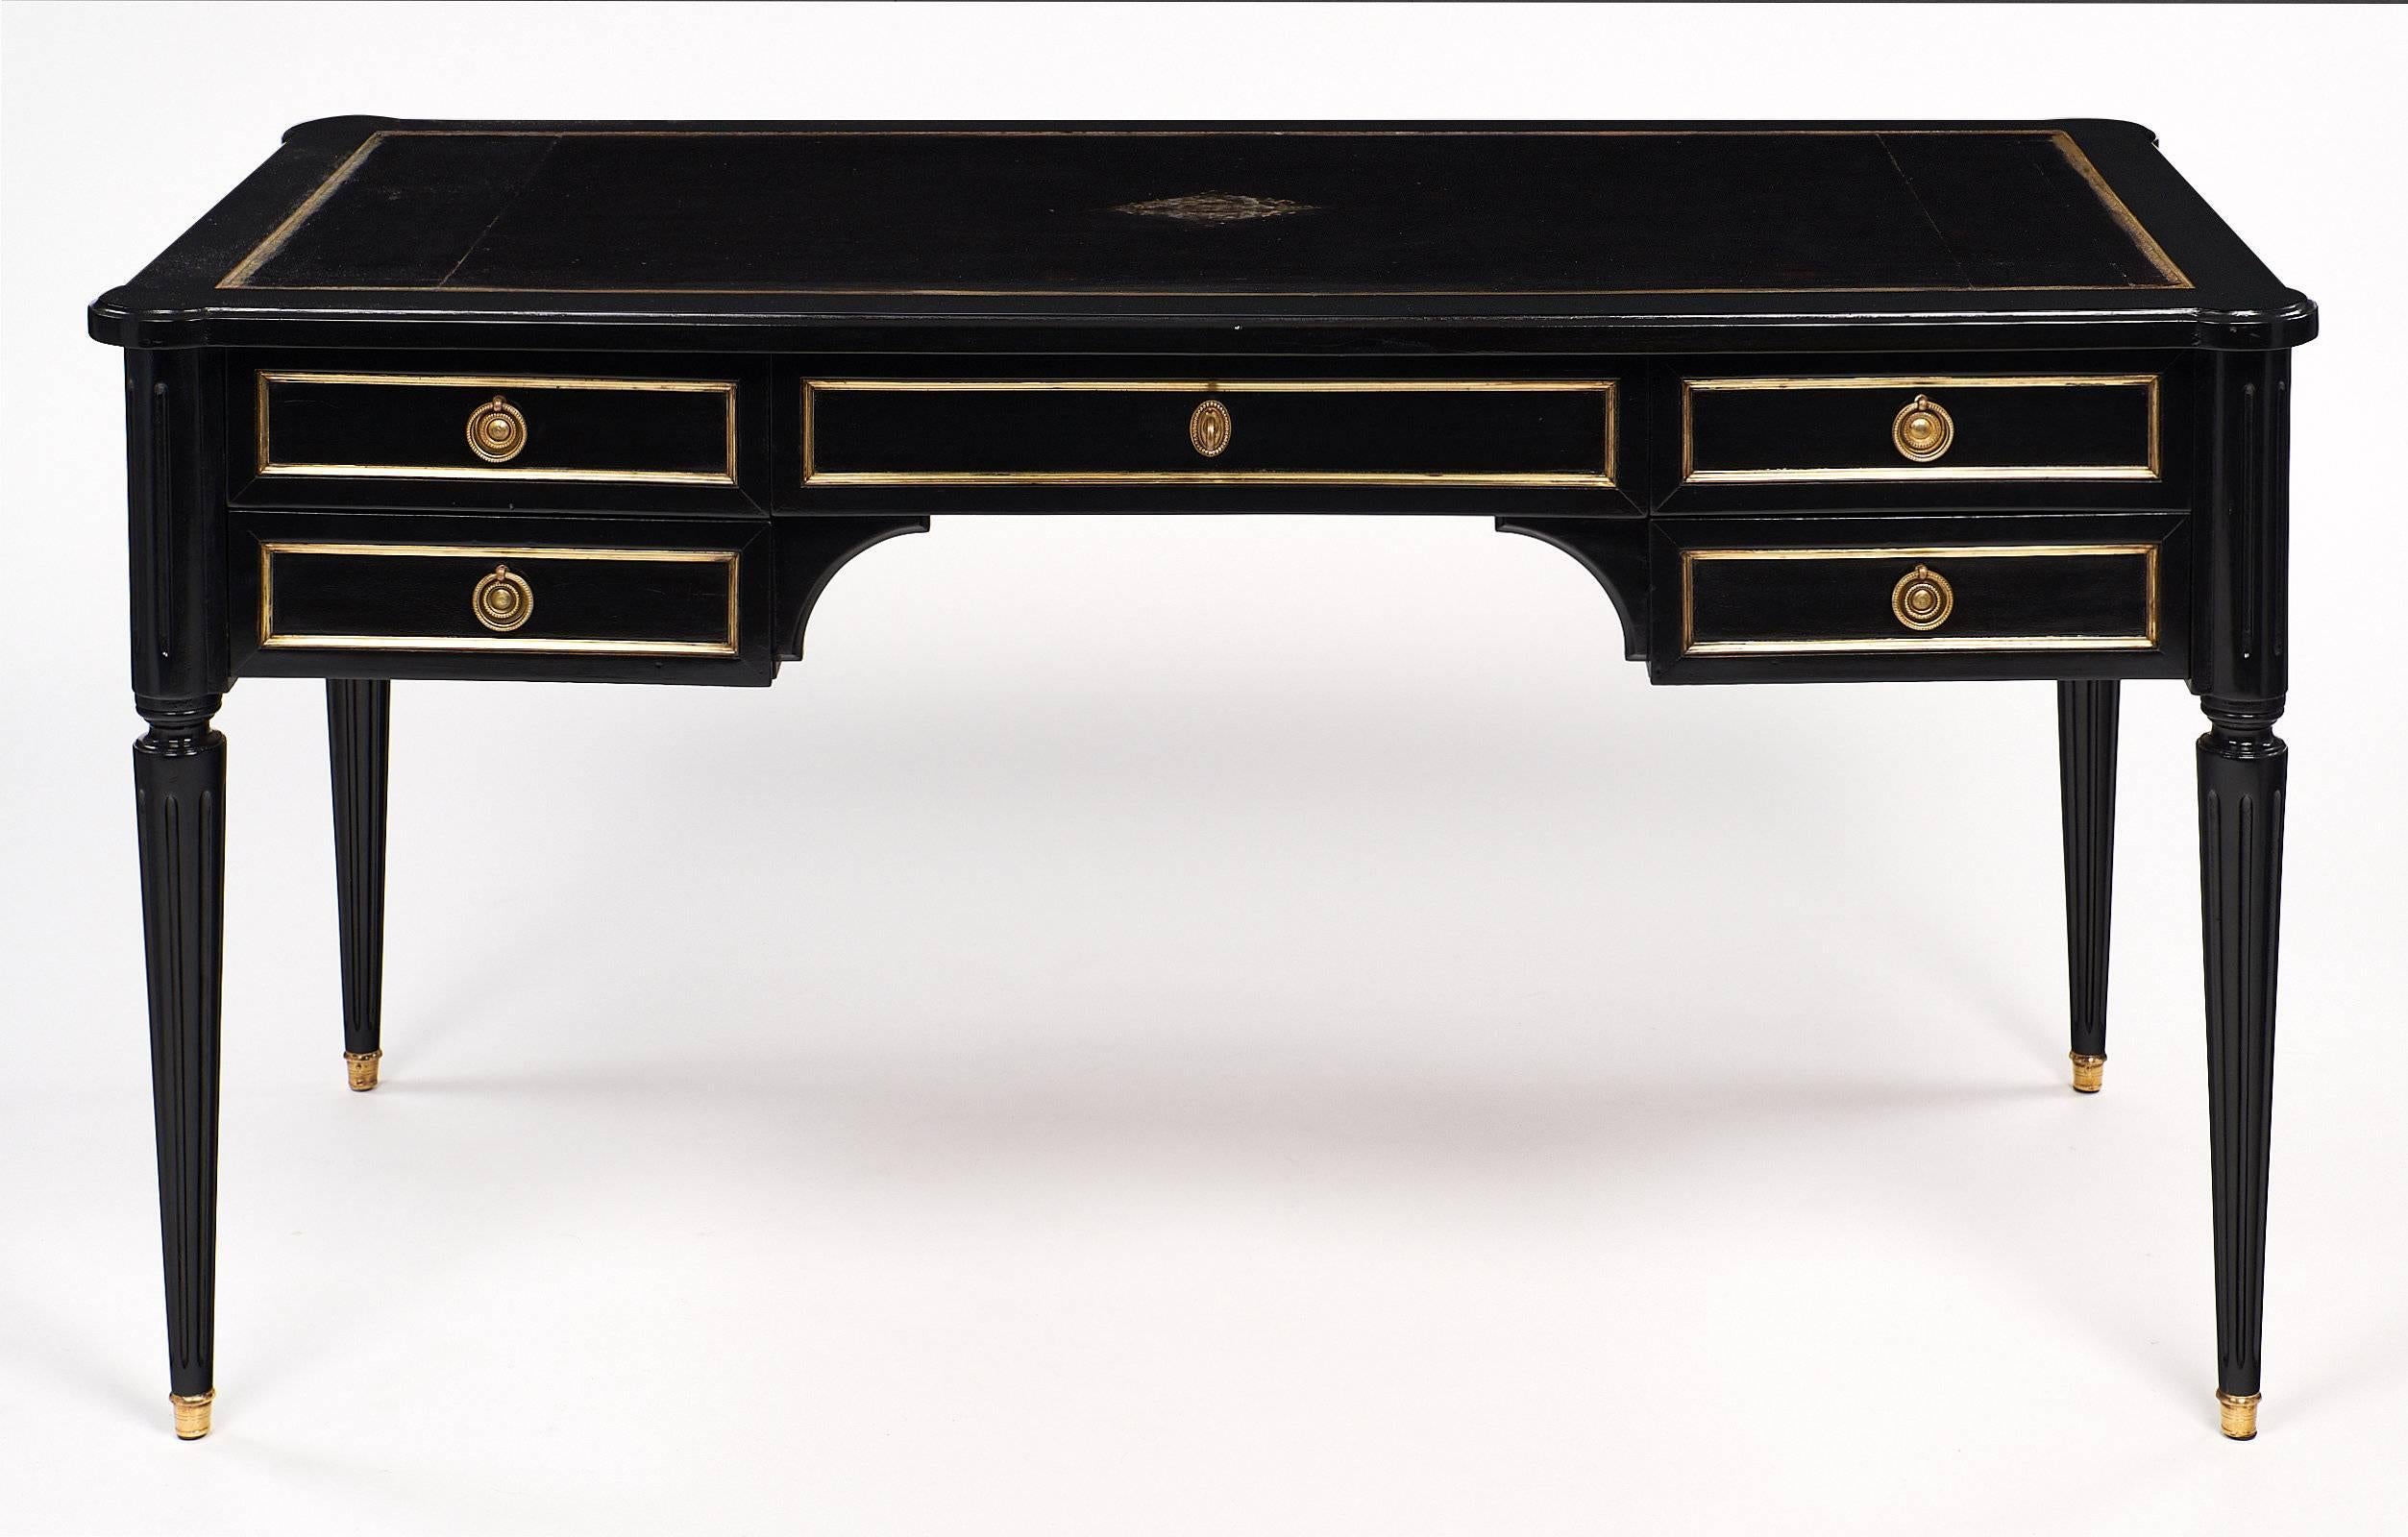 Wonderful desk made of ebonized mahogany and finished with a museum quality French polish for luster. This piece has the original black leather writing surface and two pull-out leaves, each covered with the same black leather. The leather is